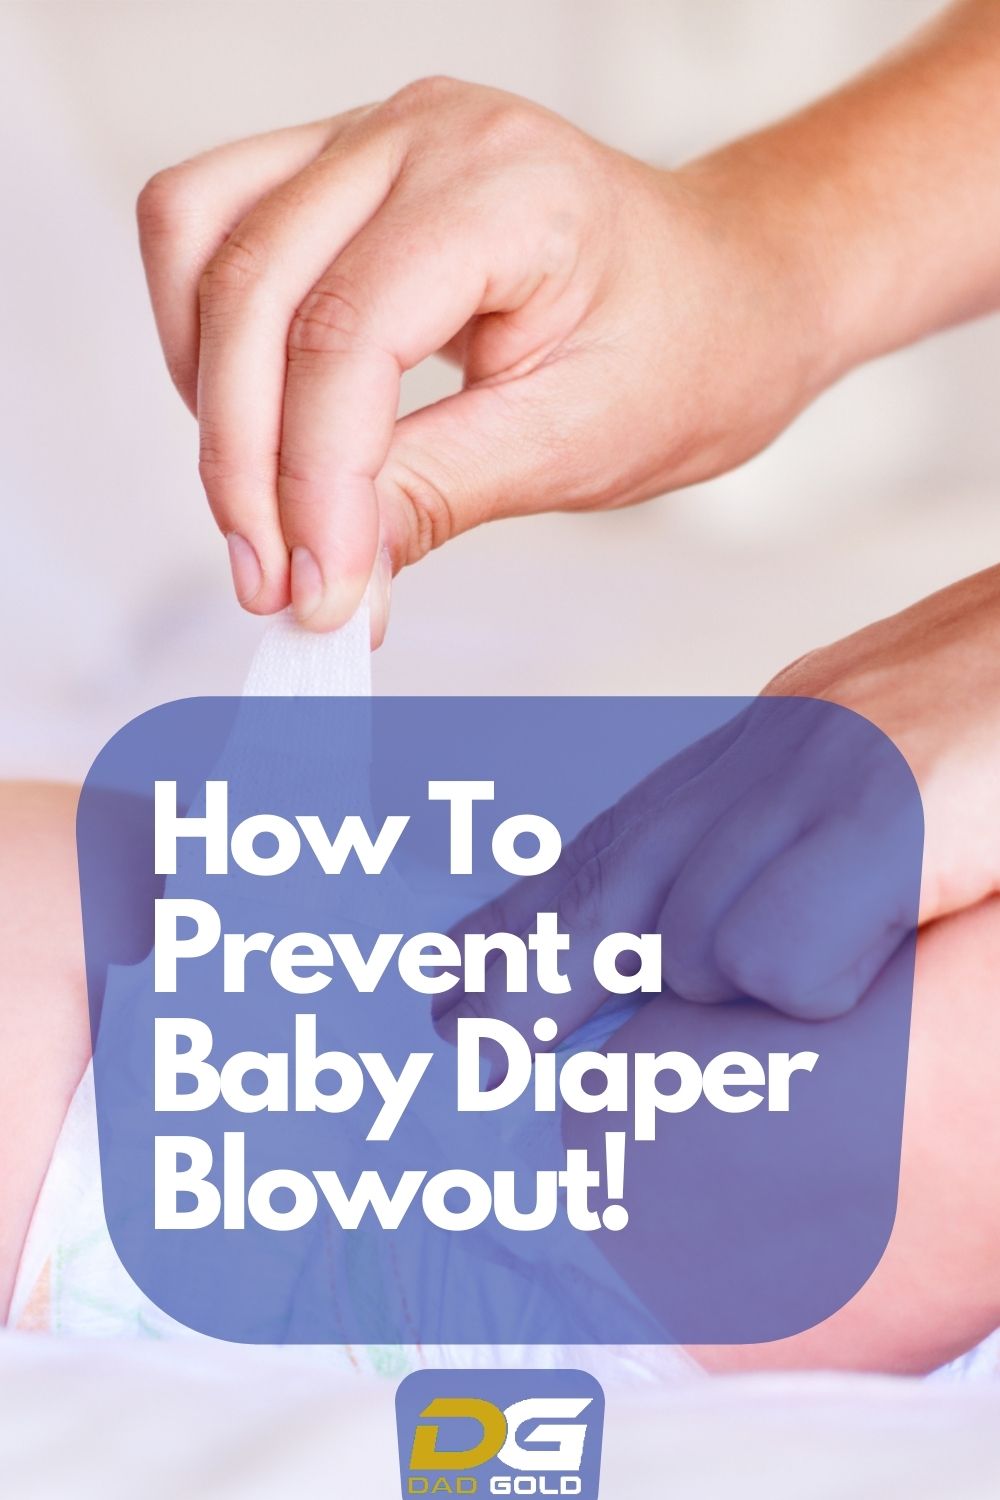 How To Prevent a Baby Diaper Blowout!